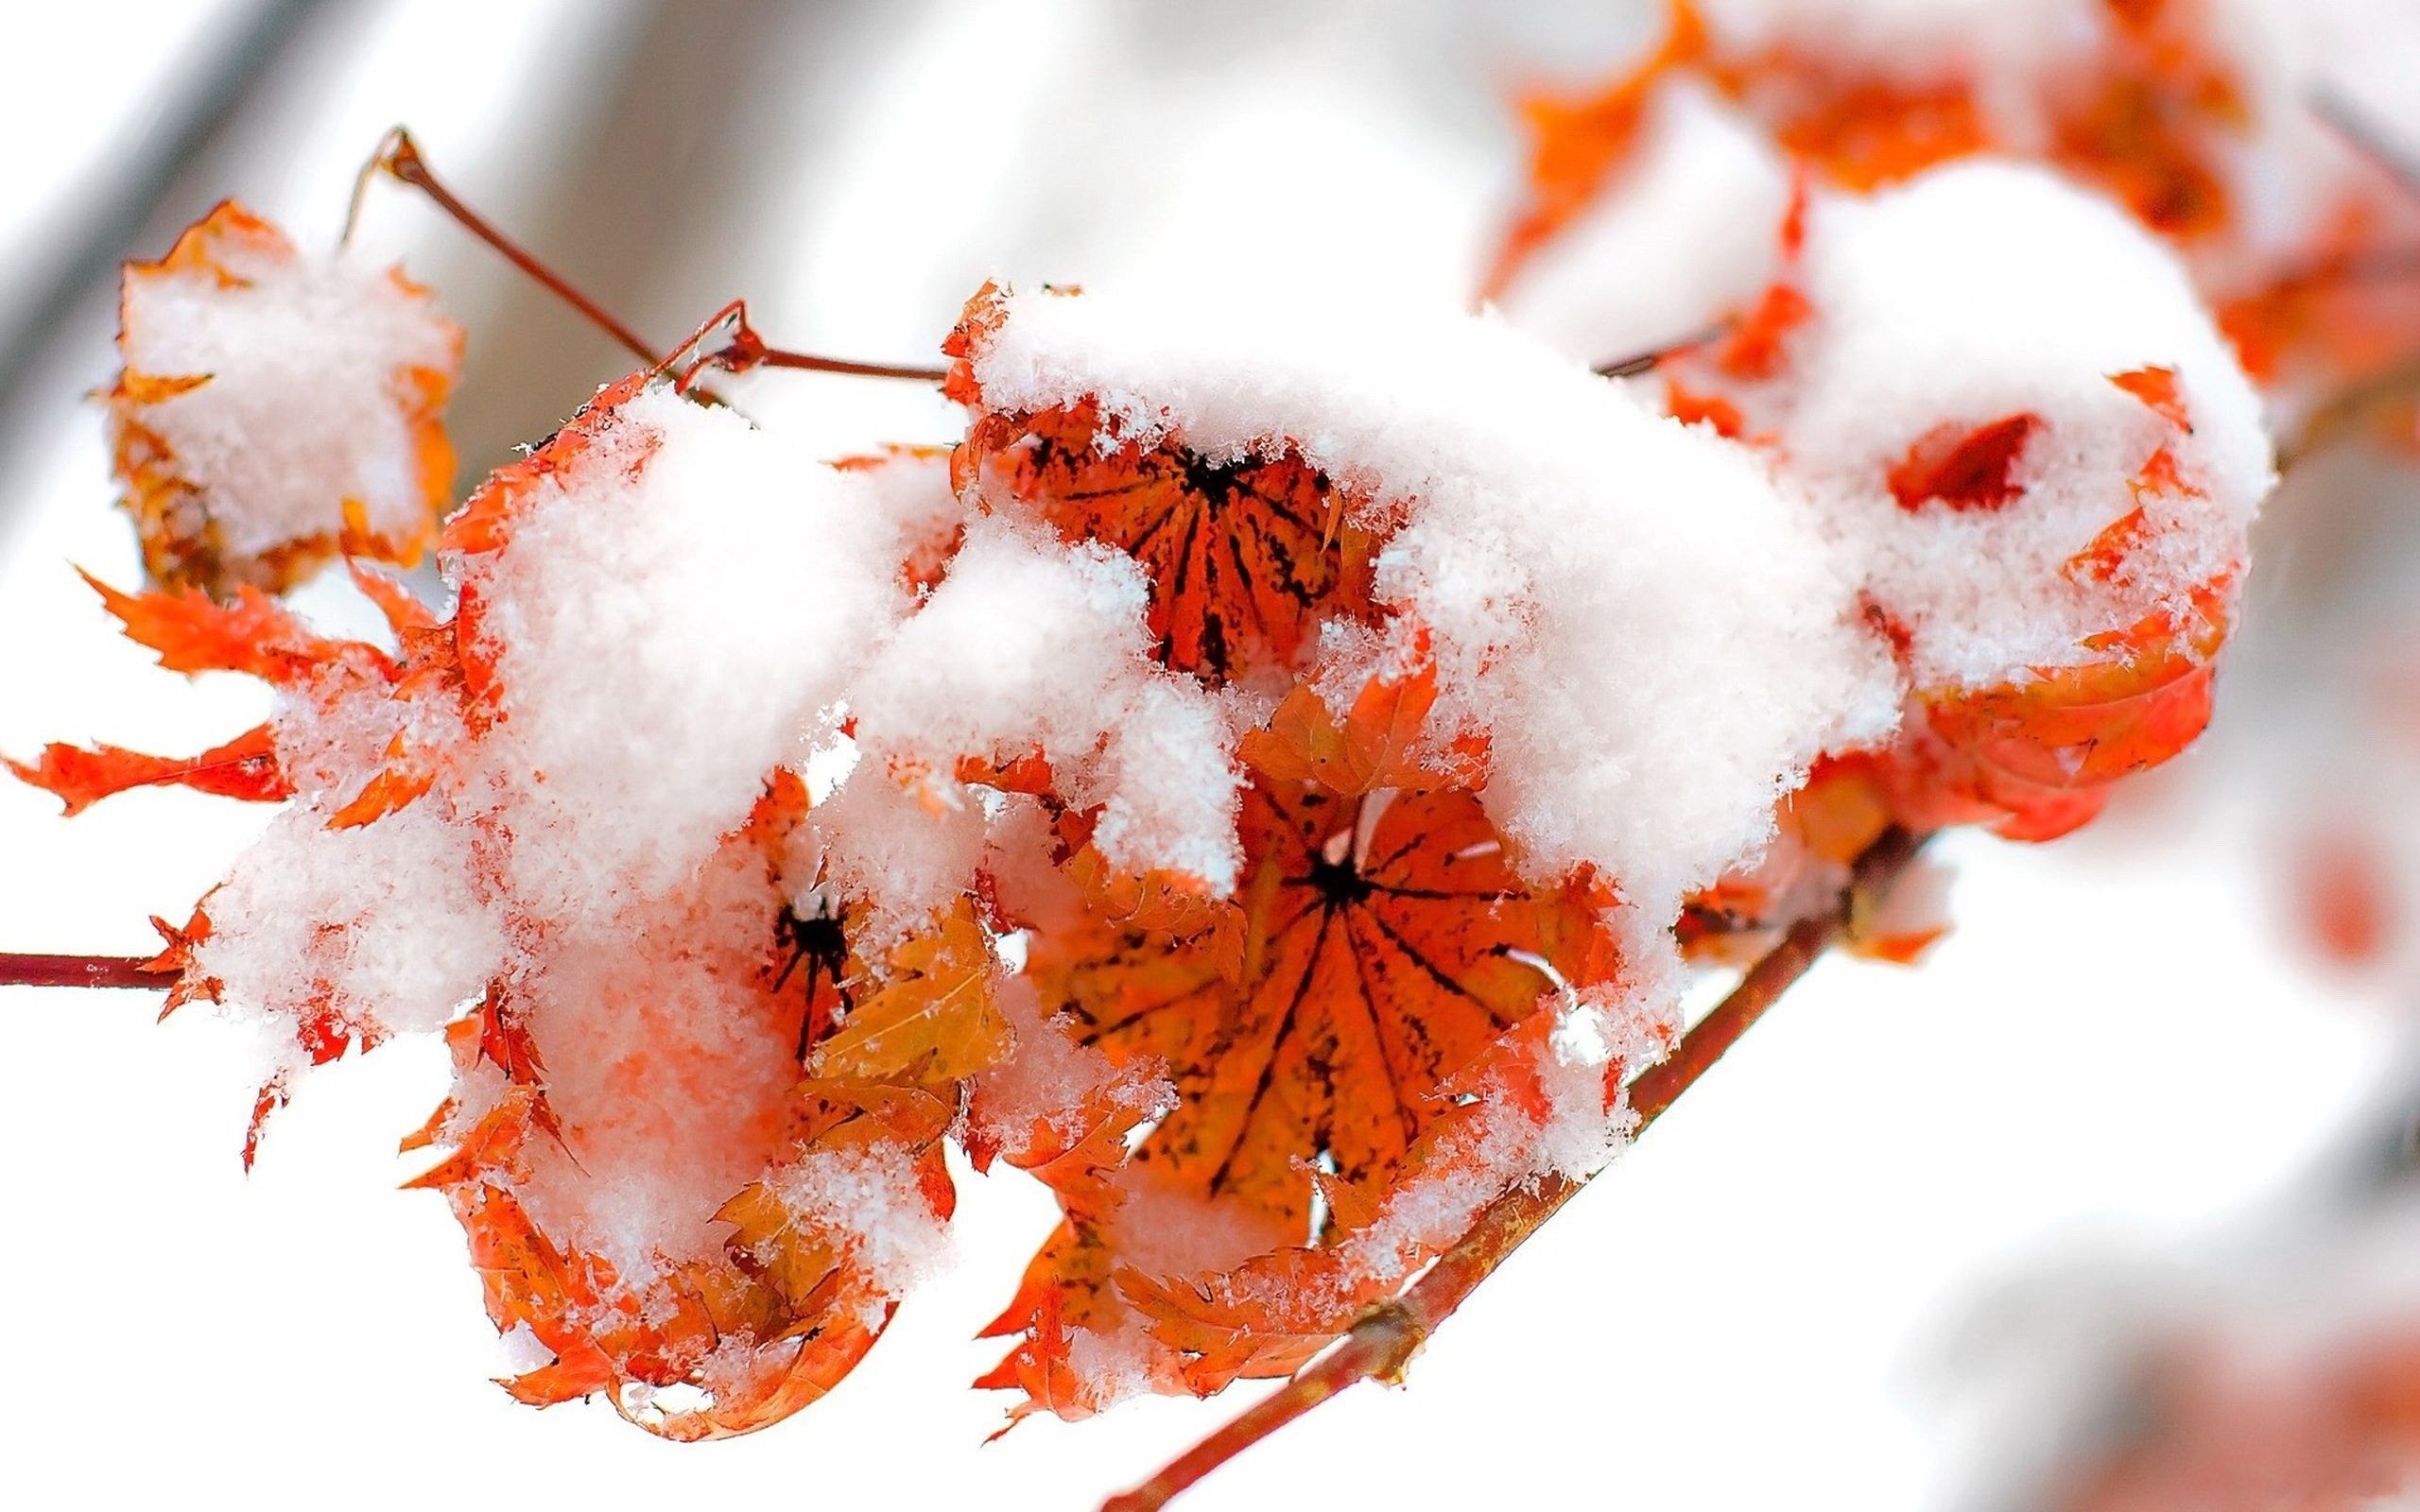 Nice Snow On Leaves In Winter Season Wallpaper HD 4k High Definition Windows 10 Colourful Image Background Download Wallpaper Free 2560x1600